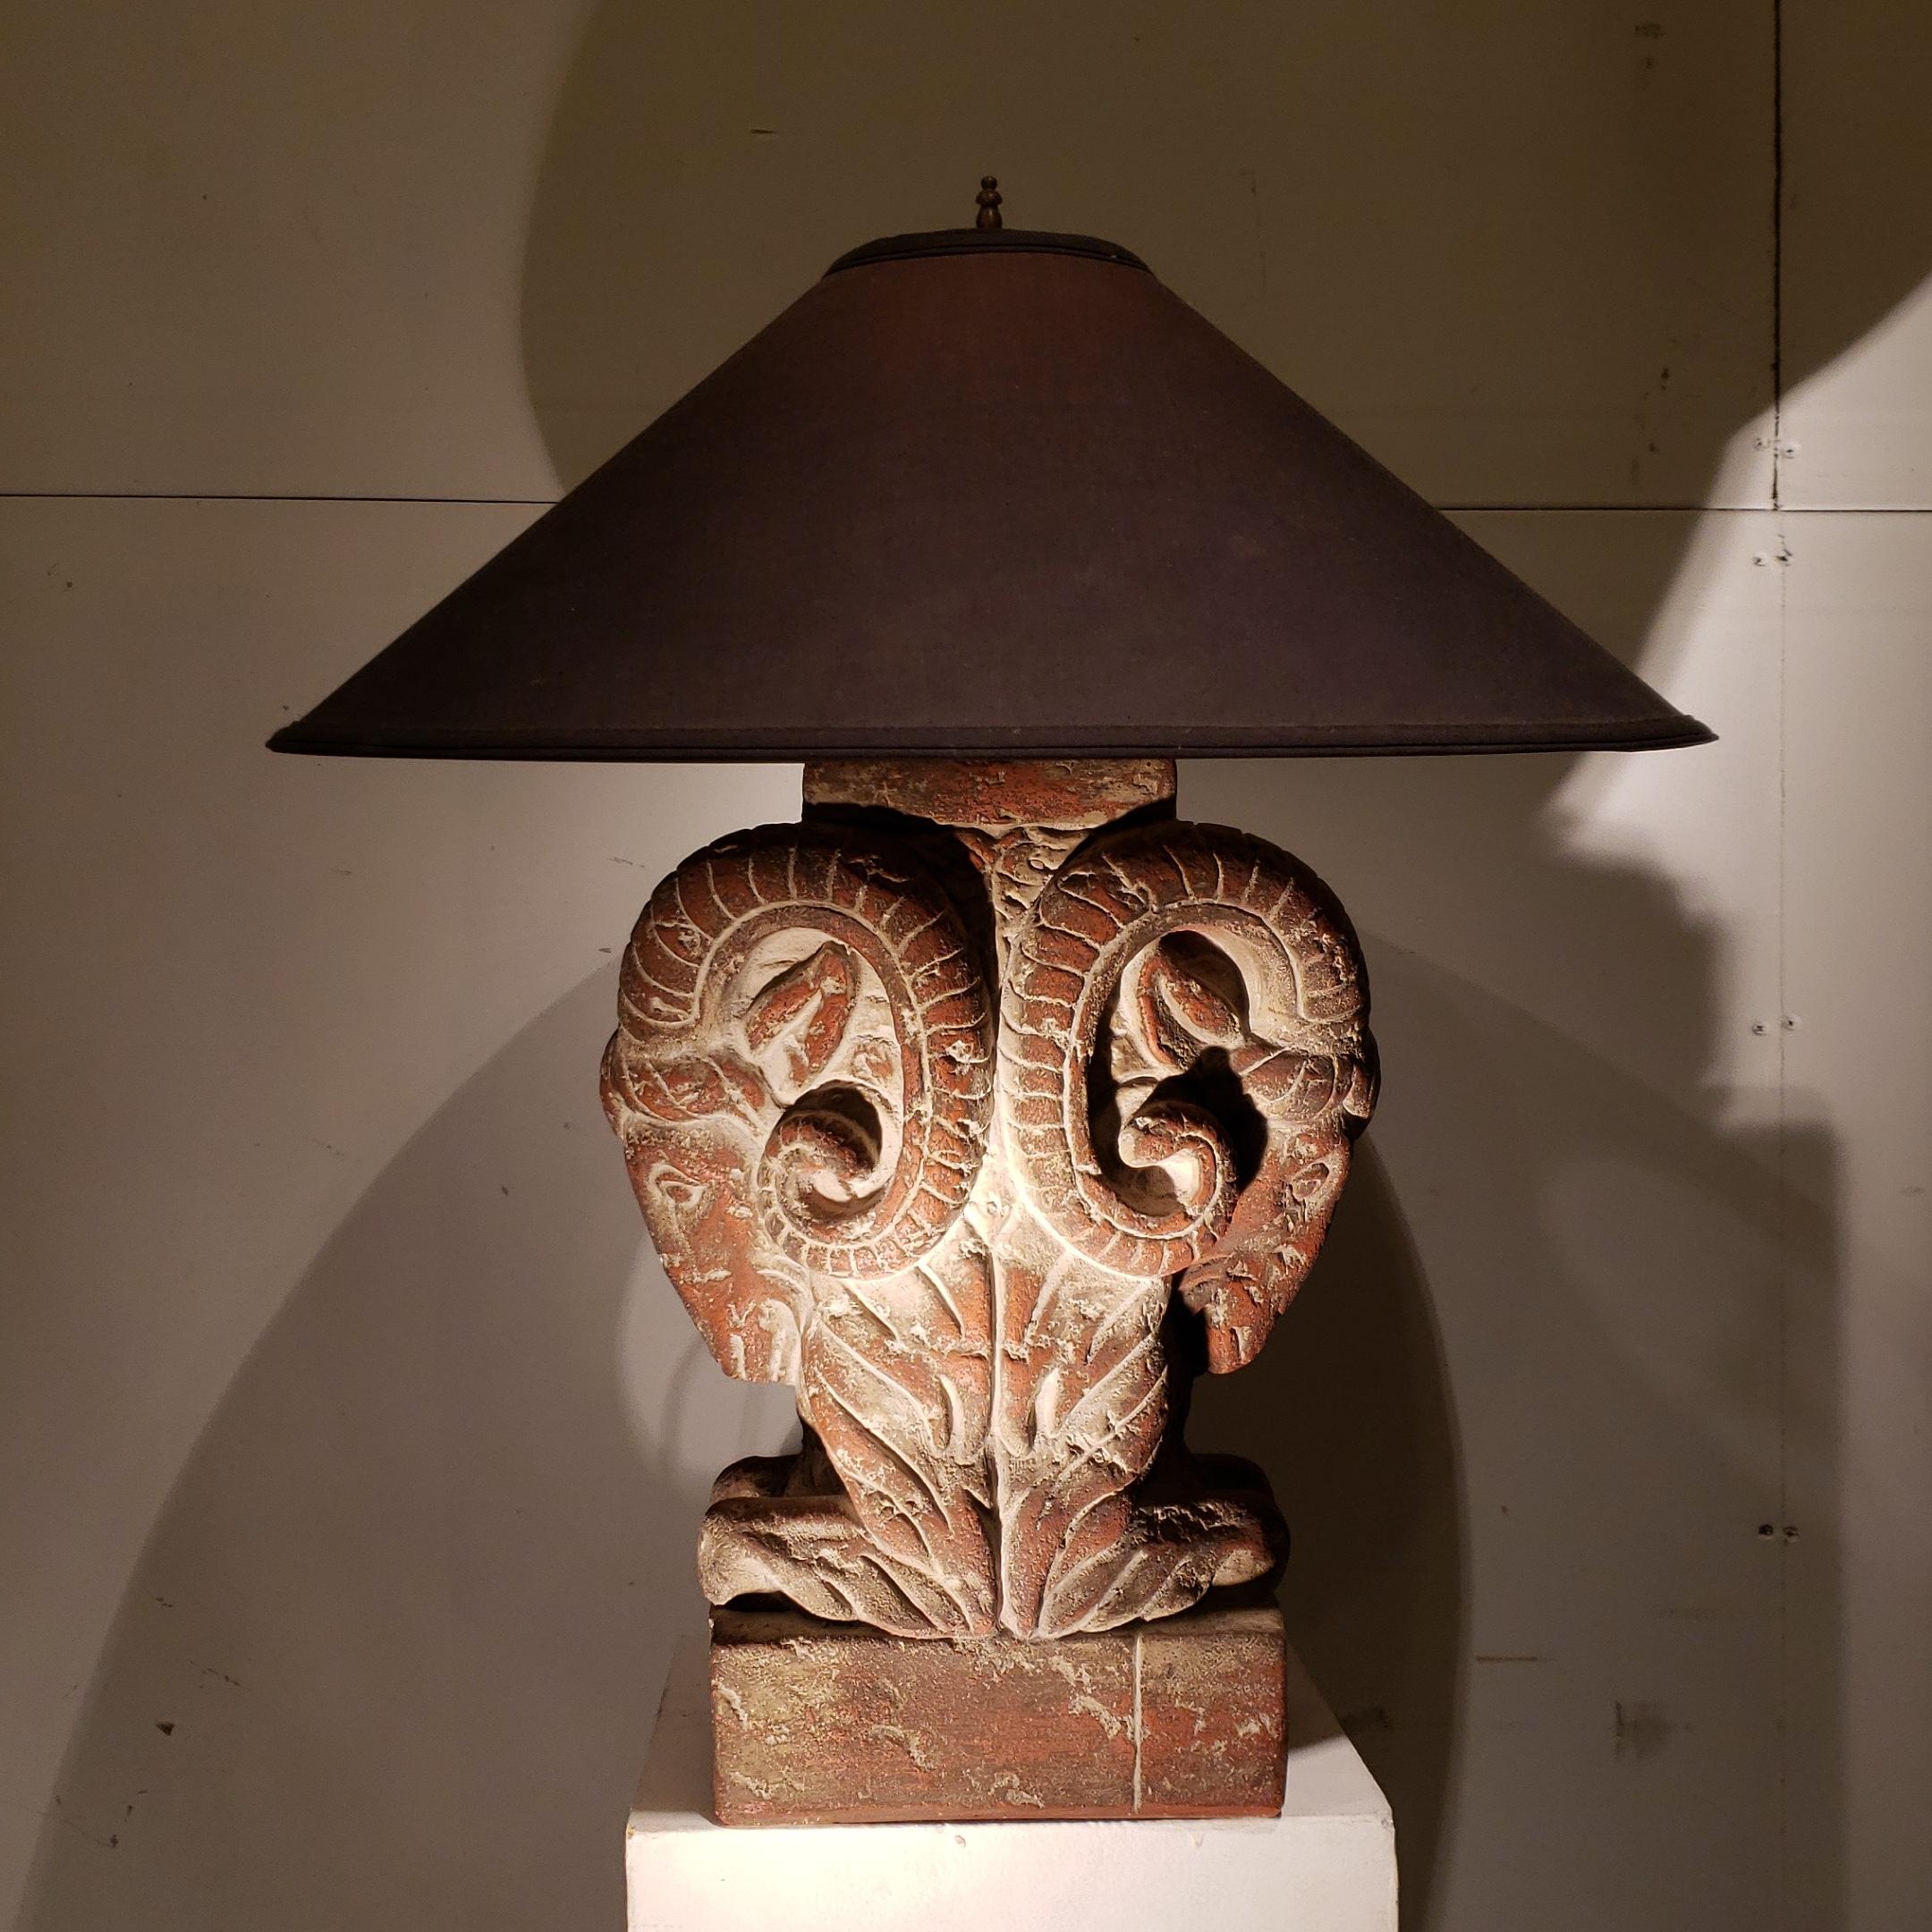 A very strong pair of rams head lamps in plaster and terracotta. Retains the original shades but they should be replaced.